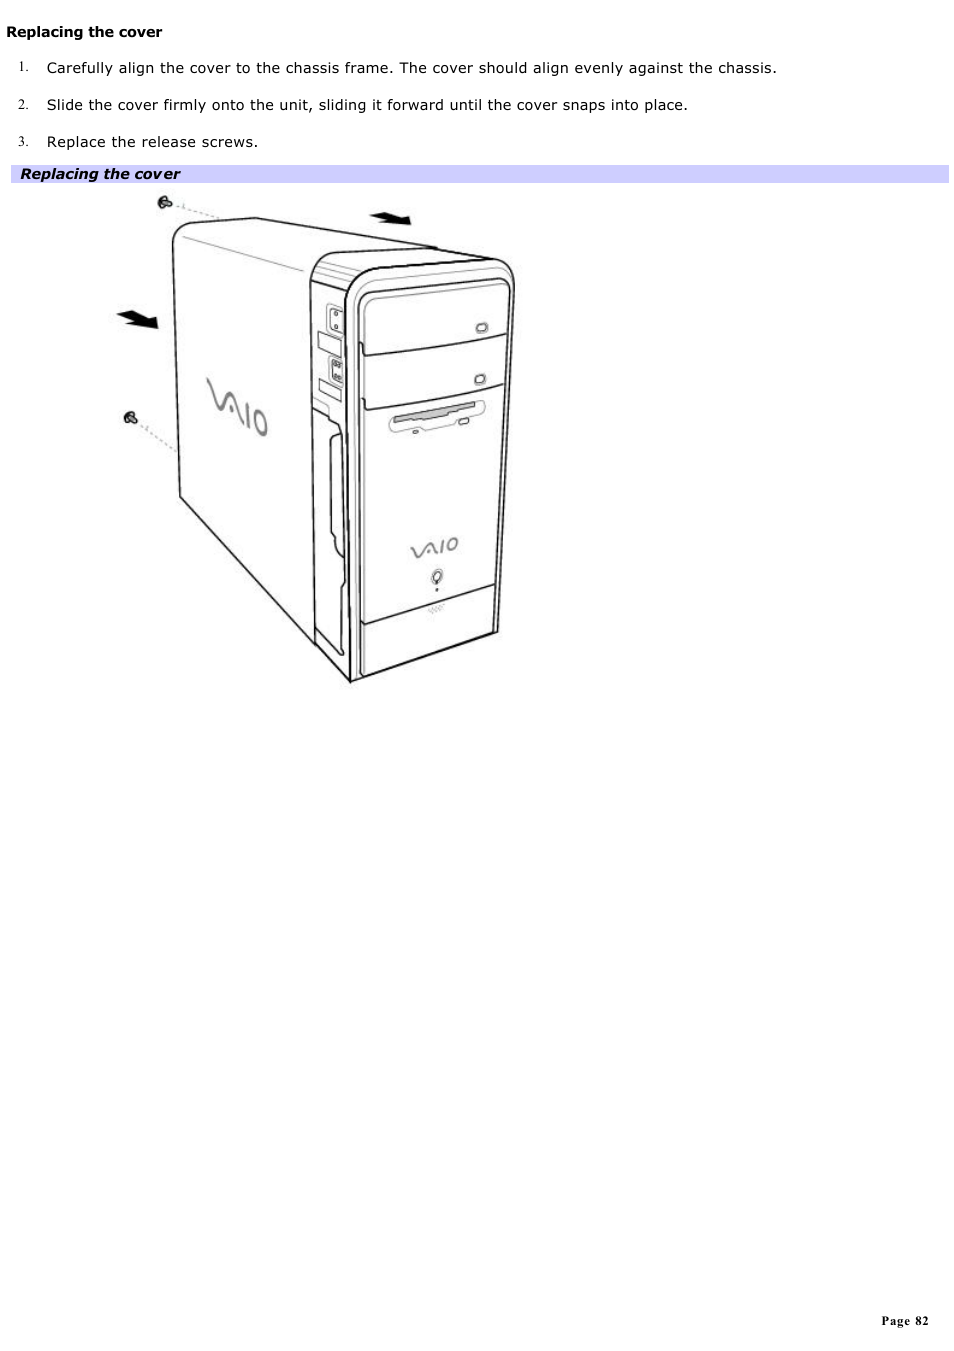 Sony PCV-RS411 User Manual | Page 82 / 146